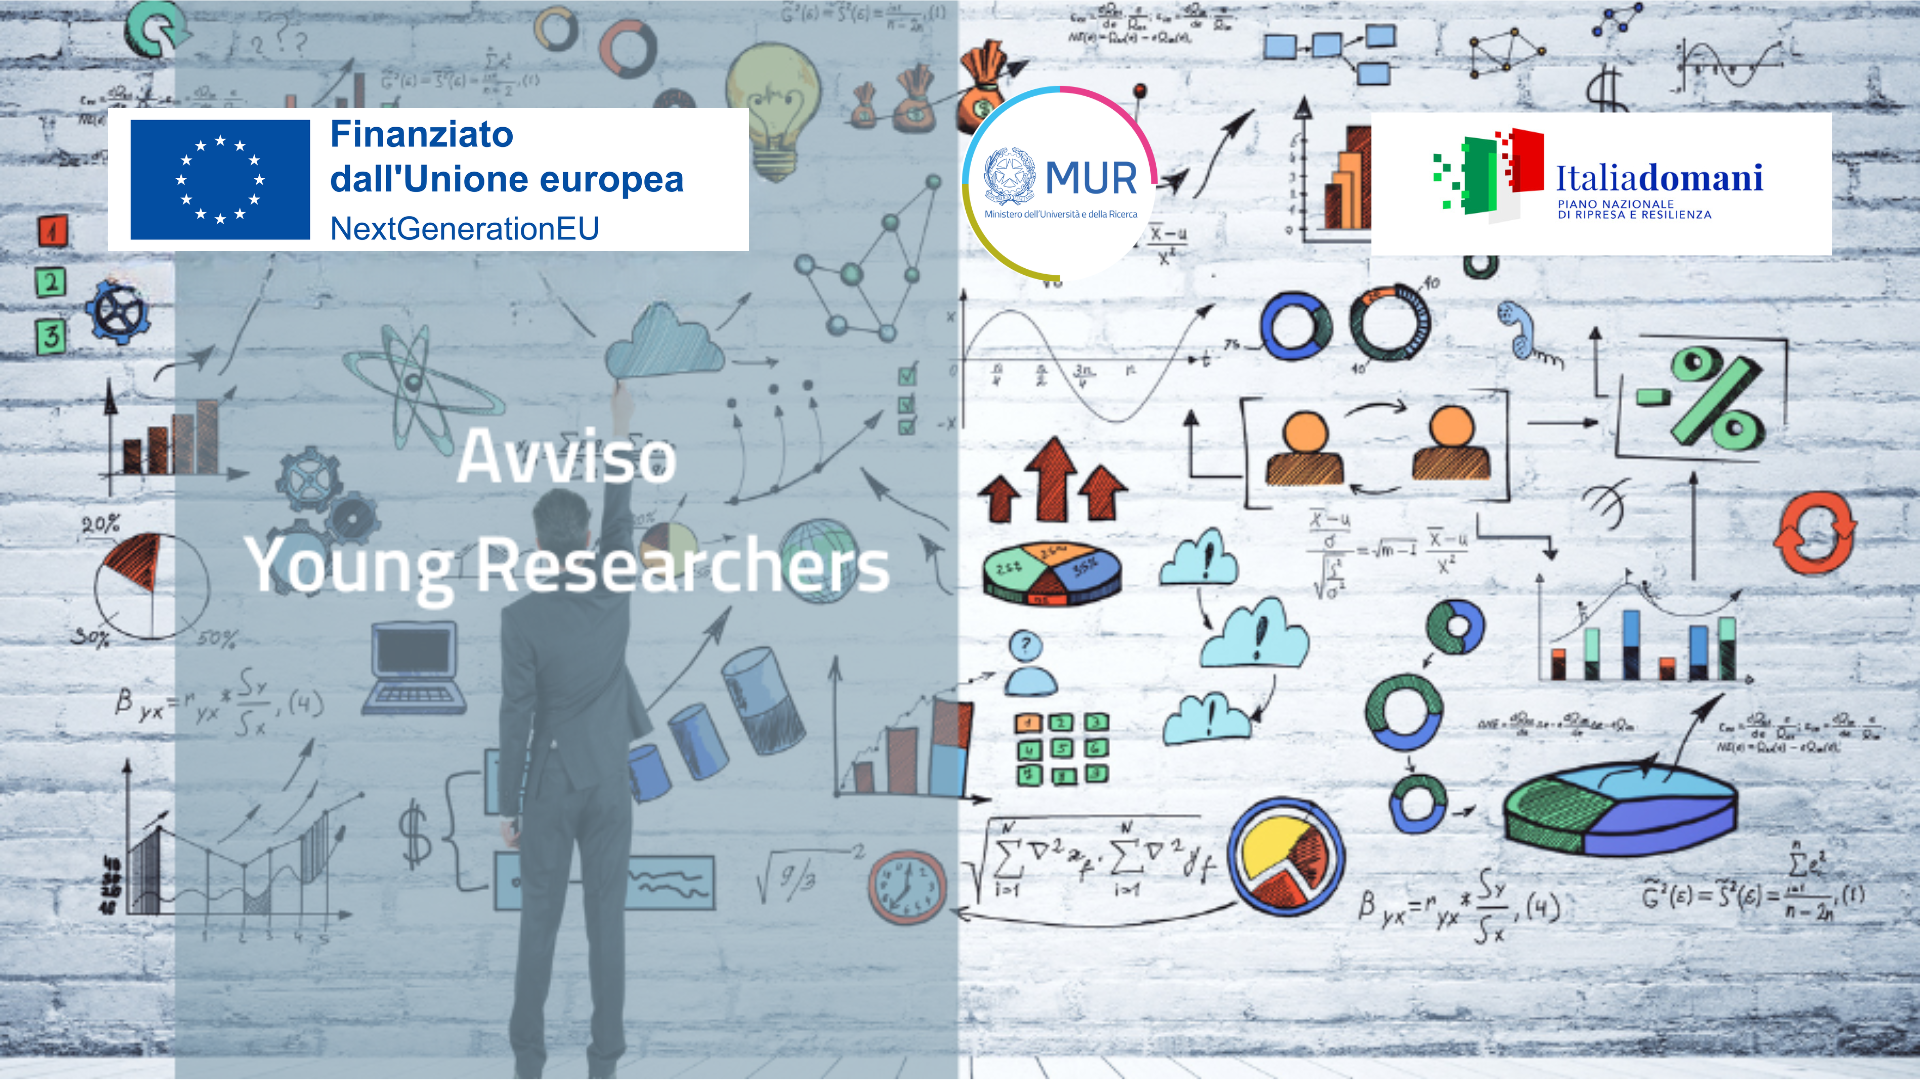 Avviso Young Researchers